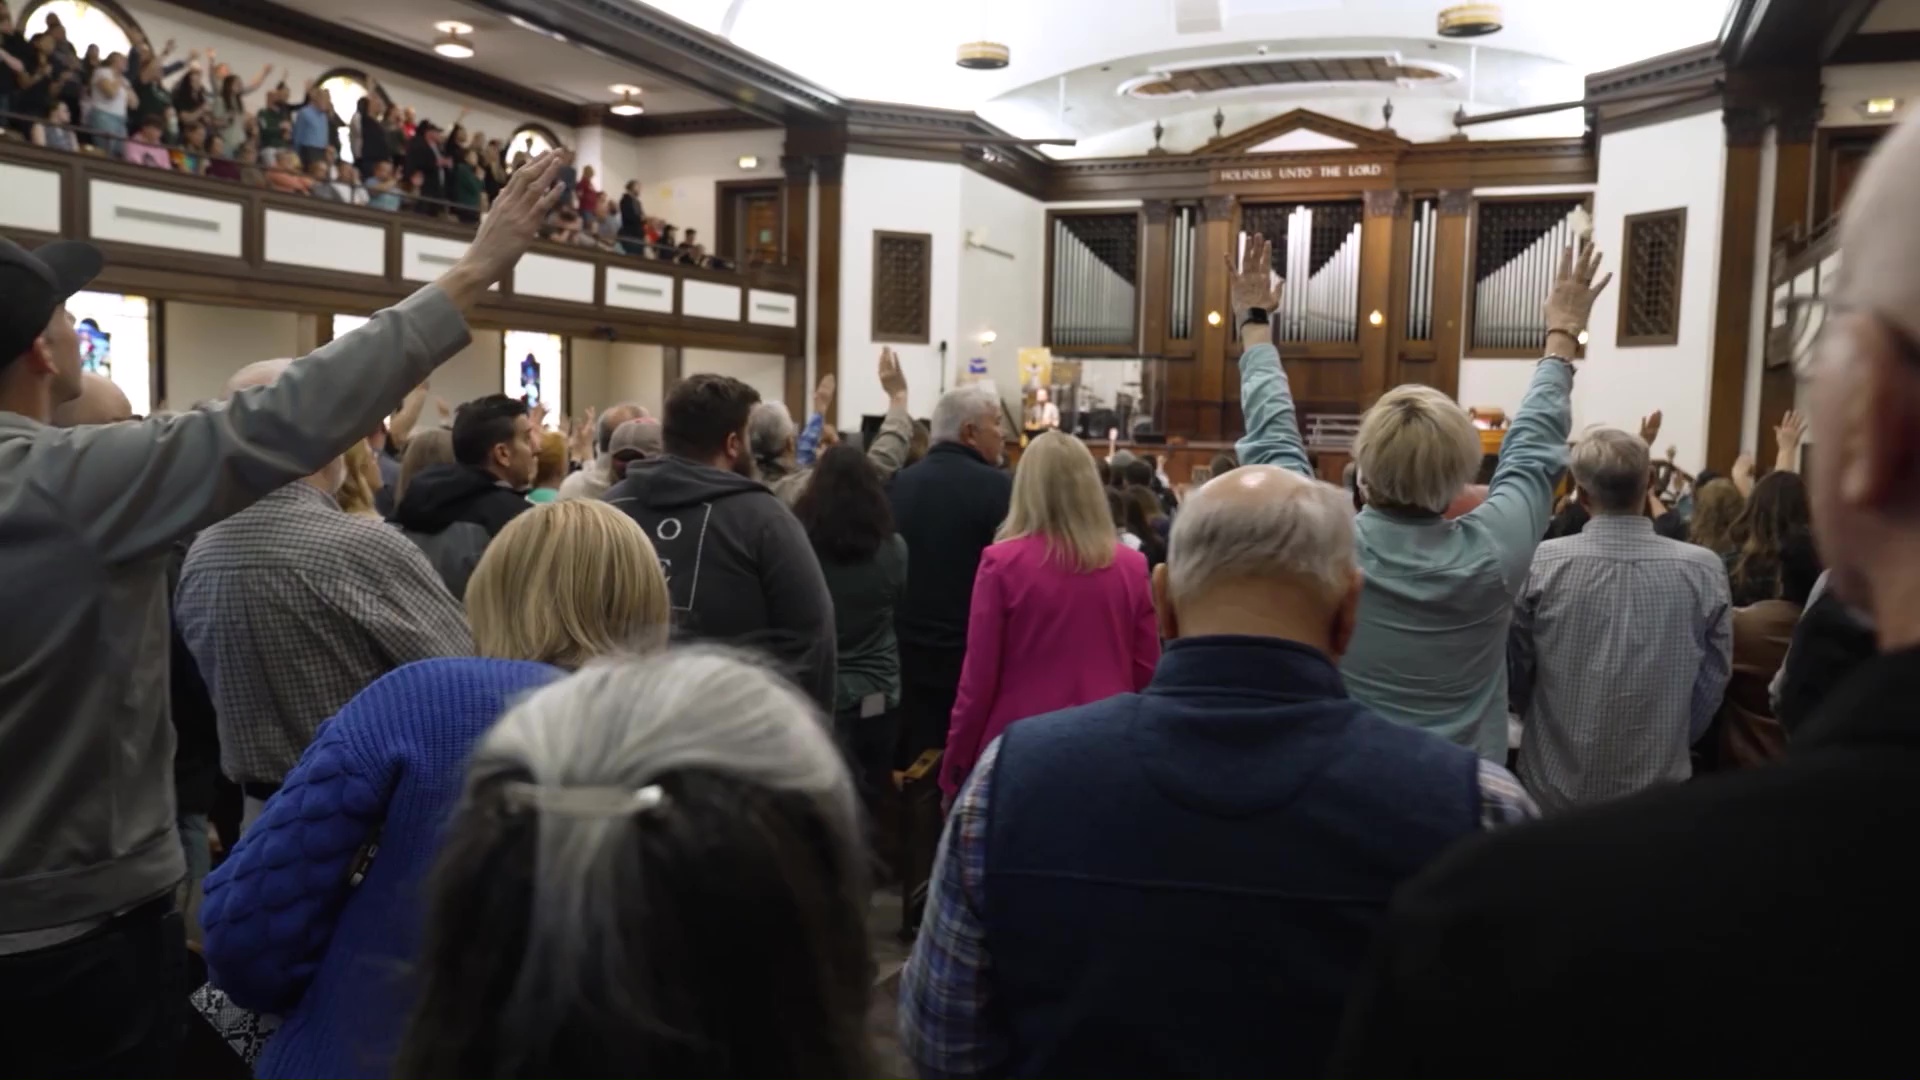 Kentucky's Asbury University recently marked one year. Although it lasted for over two weeks, Asbury Revival's impact was felt far and wide.